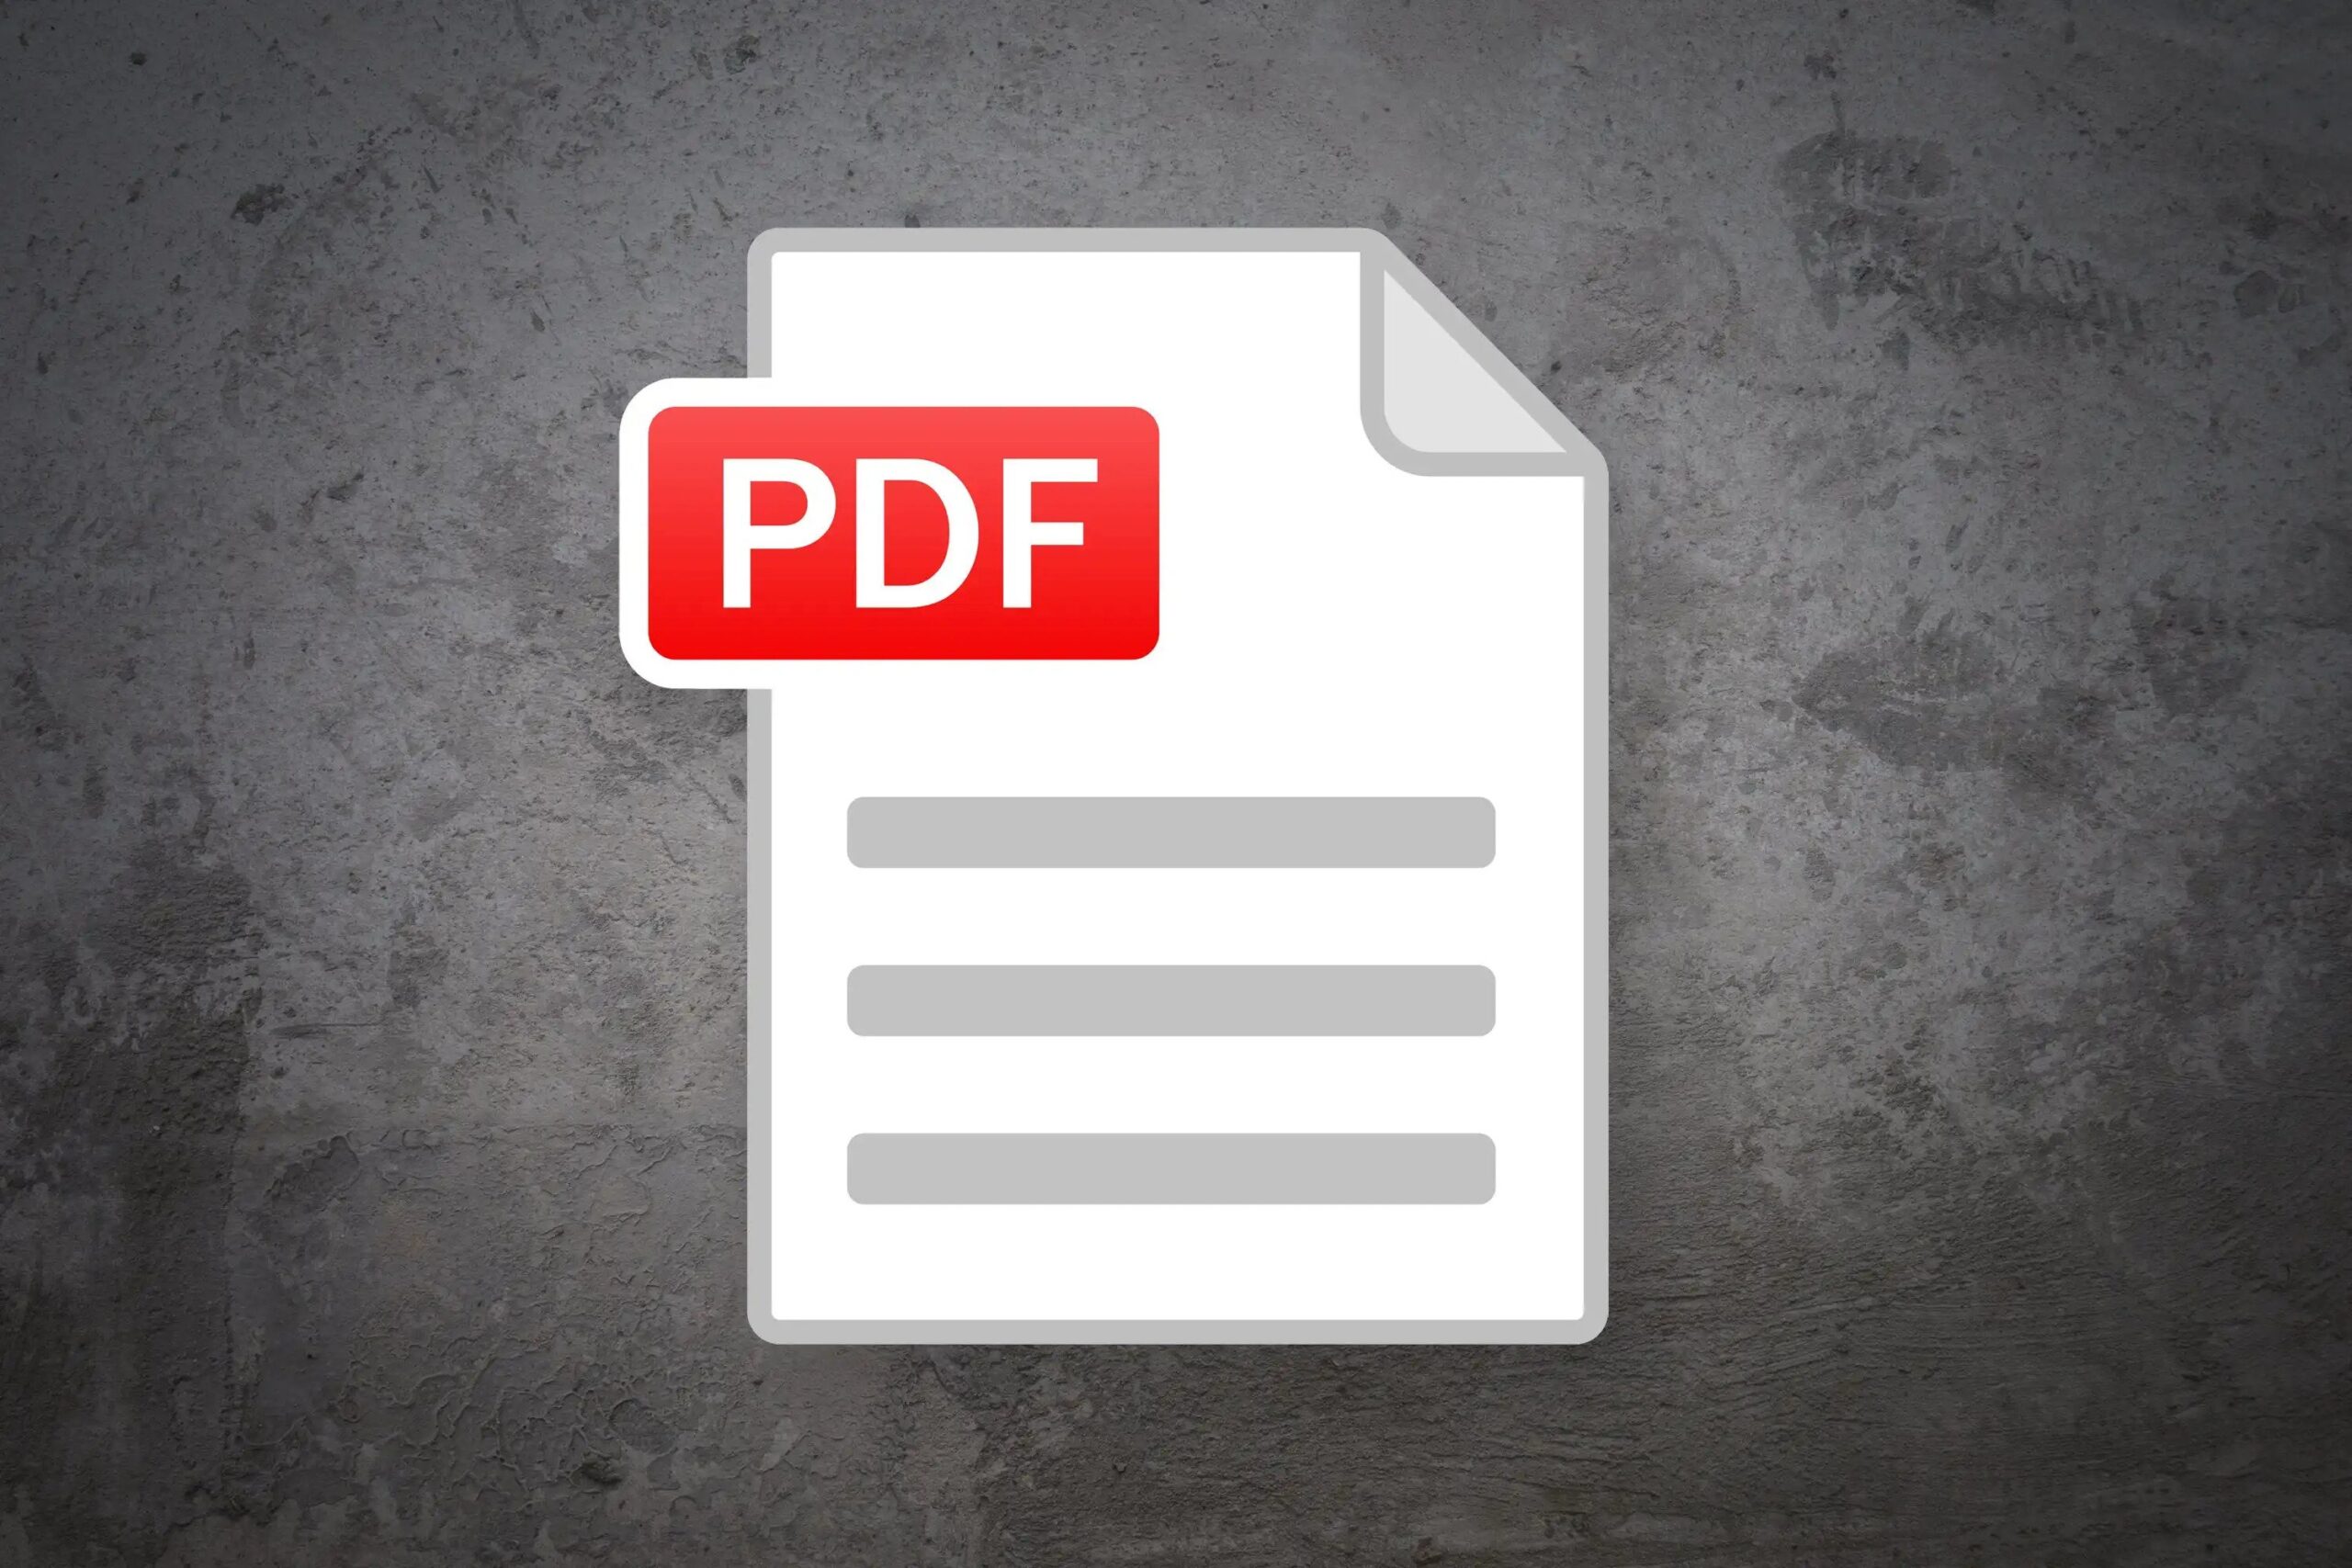 Best PDF Editors For Students